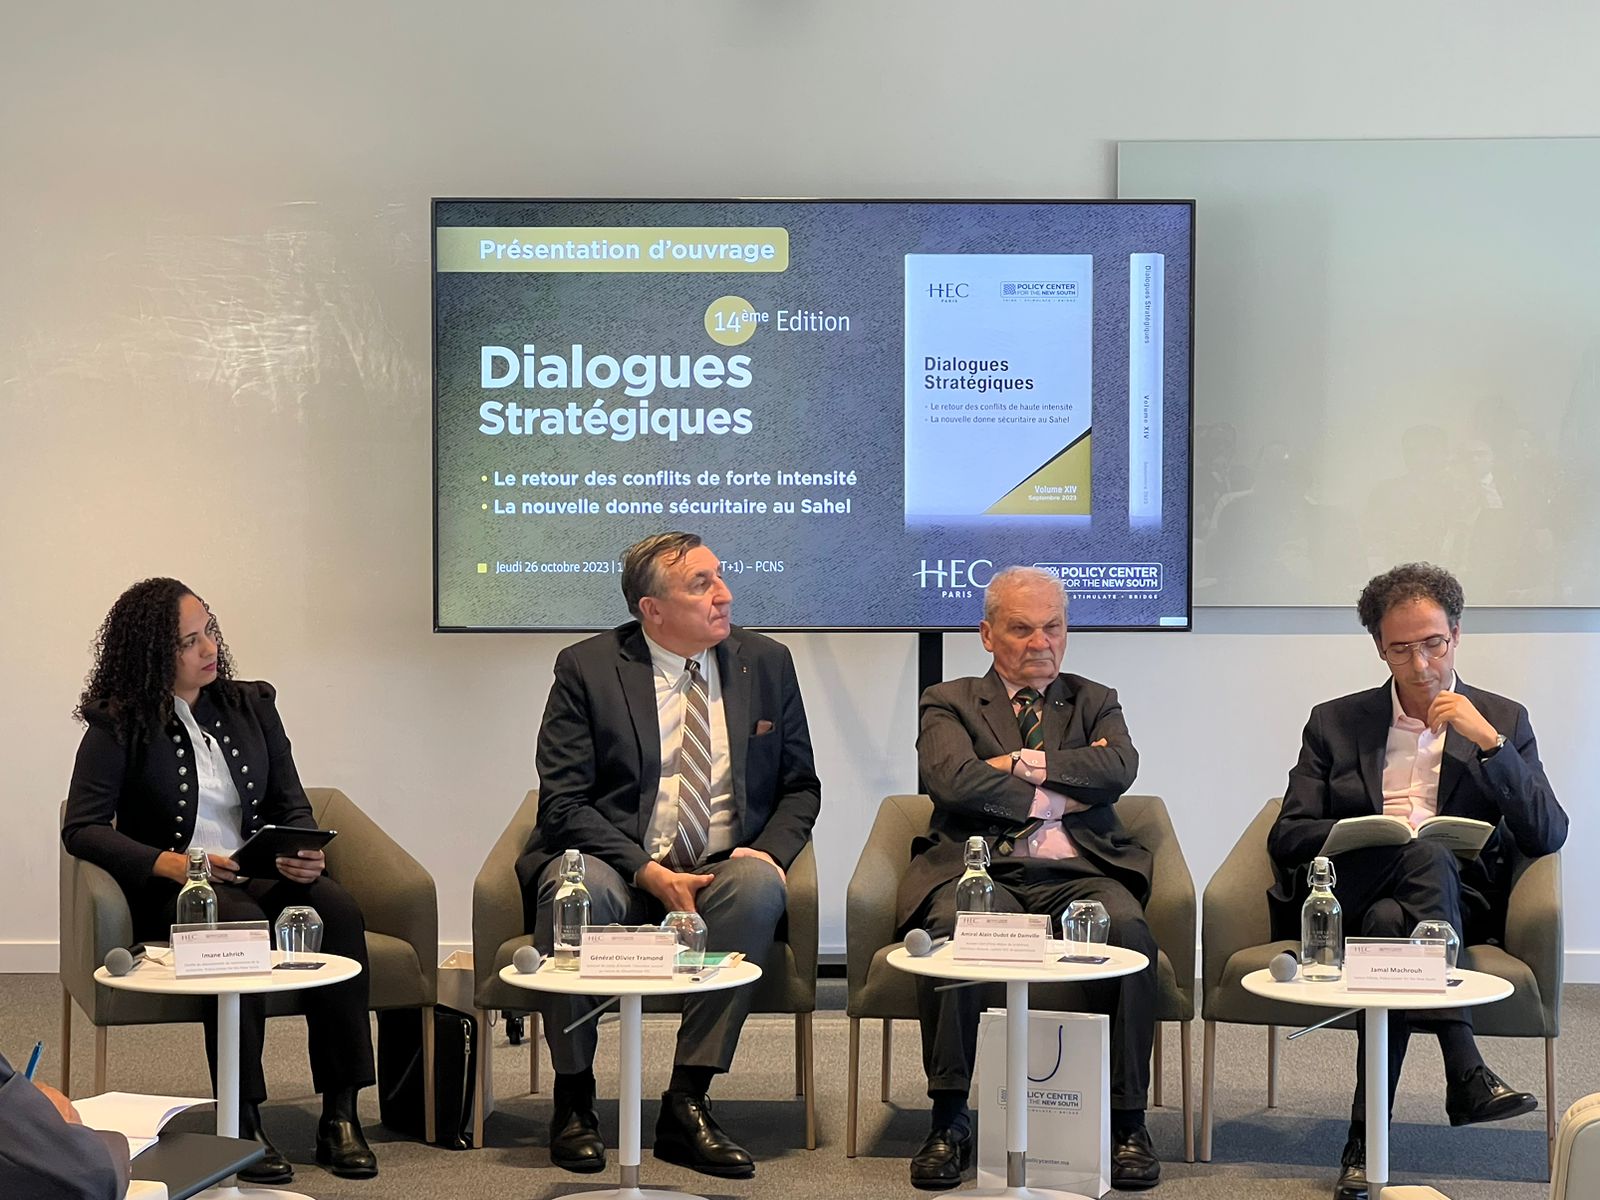 12th Edition of 'Atlantic Dialogues' International Conference Kicks Off in  Marrakech